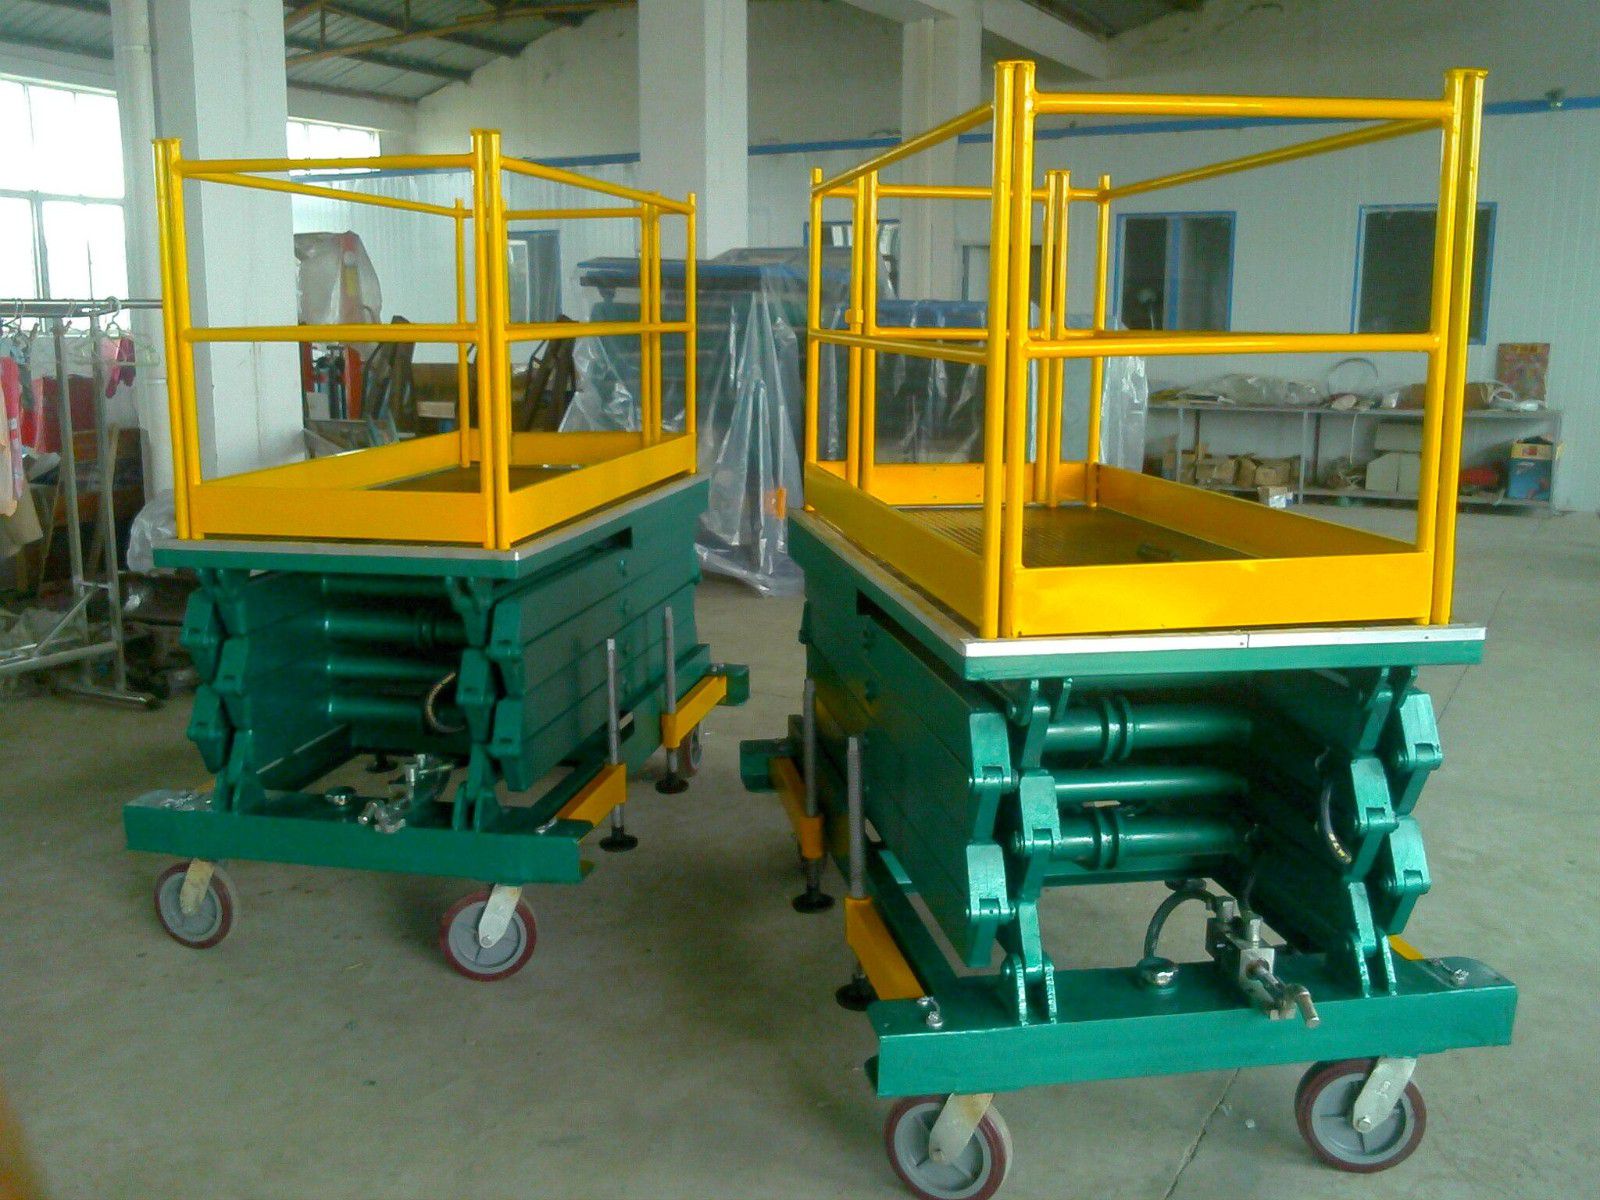 HyeliaHydraulic mobile lifting platformAre there any installation tips